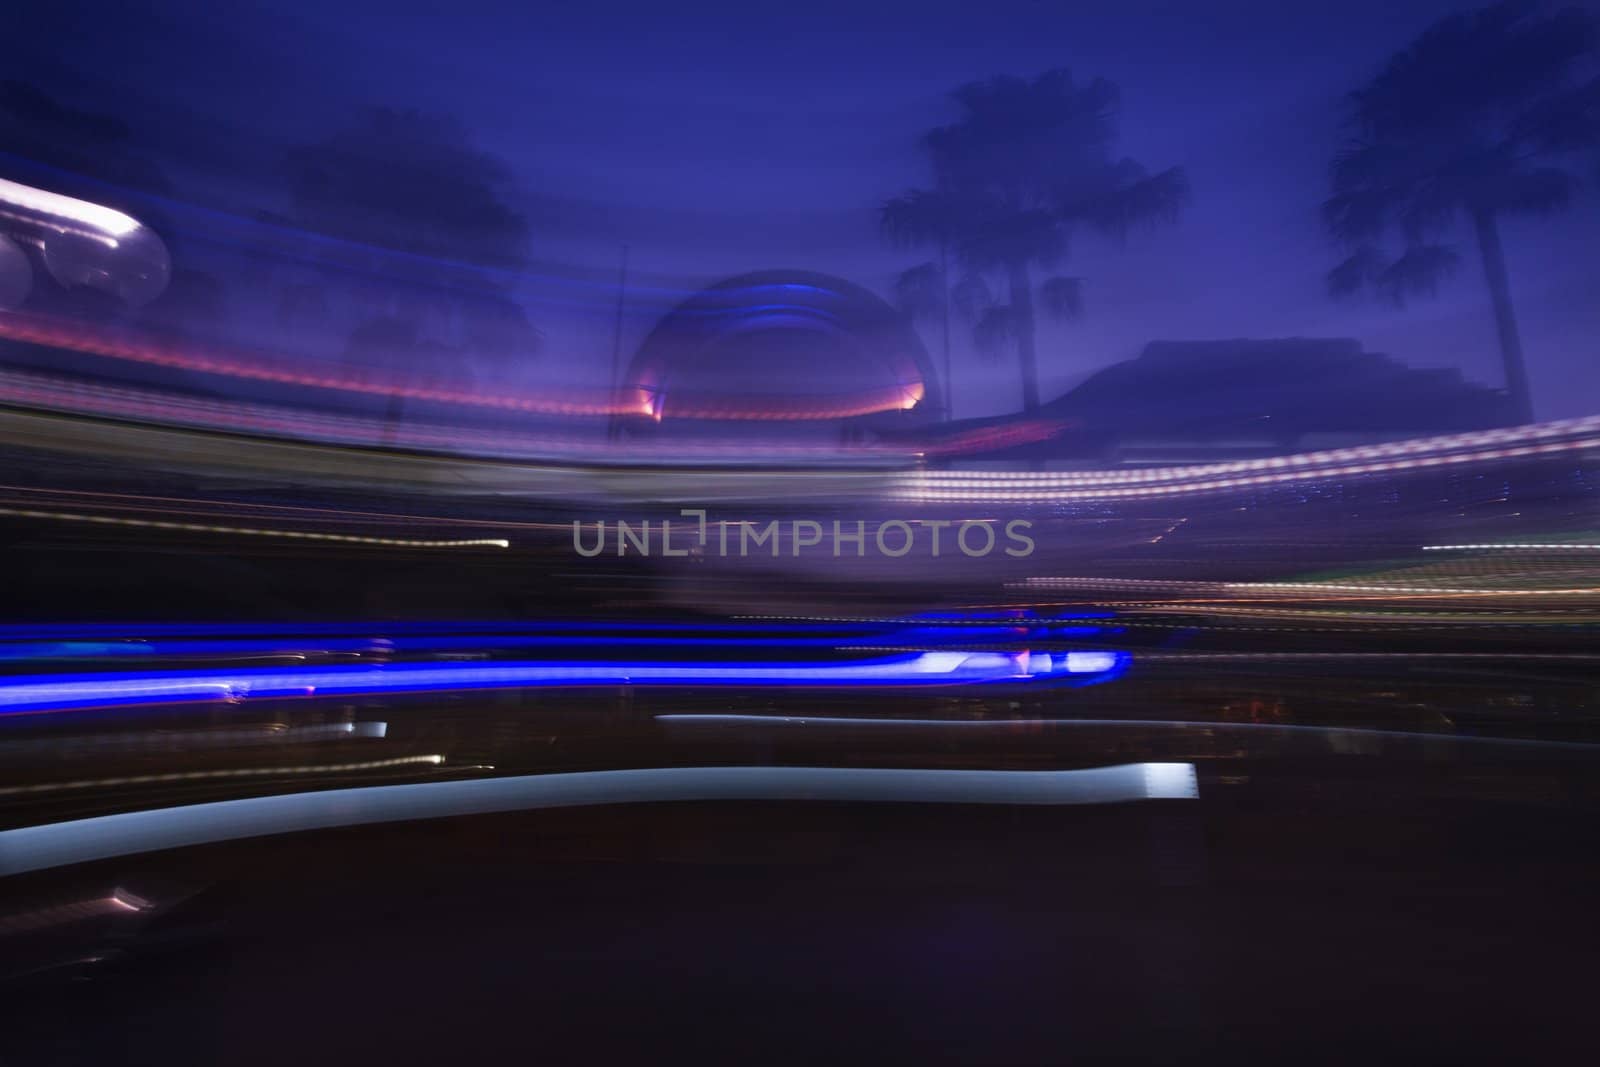 Motion blur of lights creating abstract image.